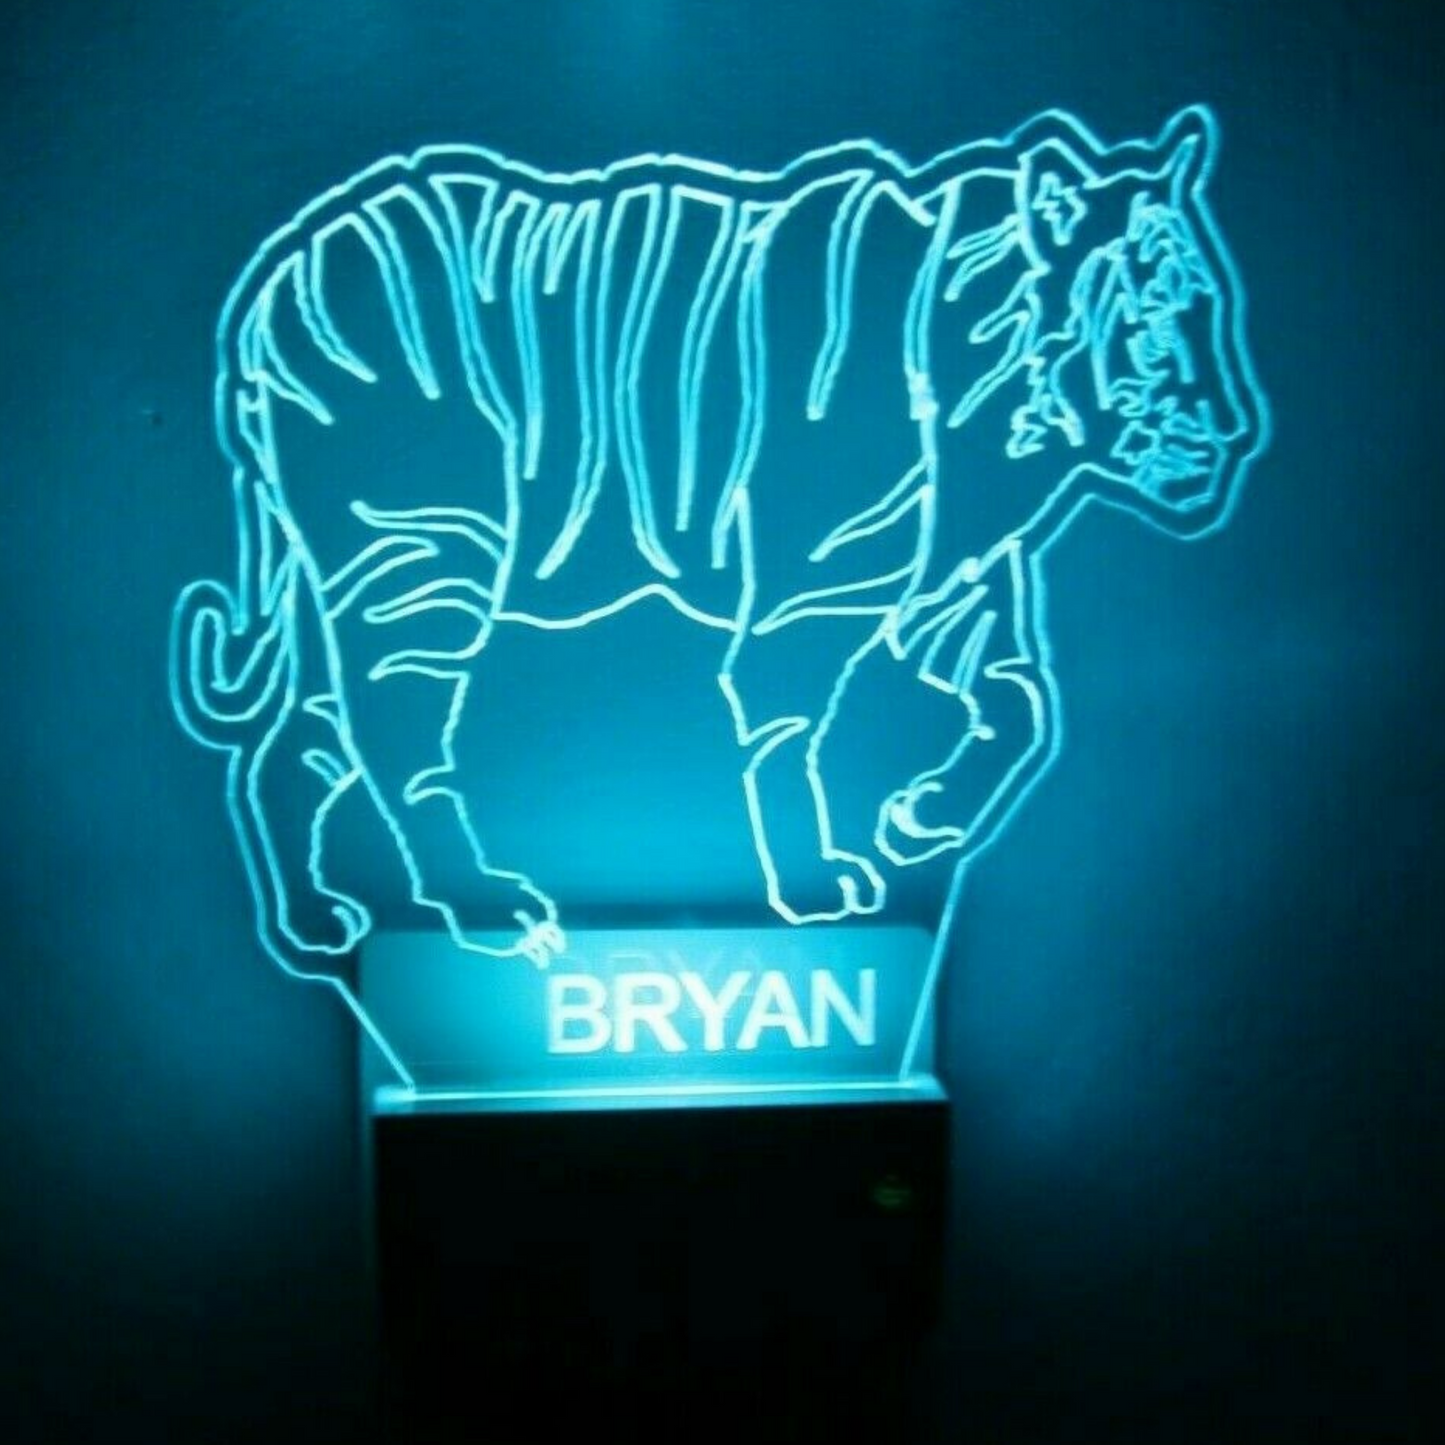 Tiger Night Light Multi Color Personalized LED Wall Plug-in, Cool-Touch Smart Dusk to Dawn Sensor Kids Children's Bedroom Hallway Super Cool